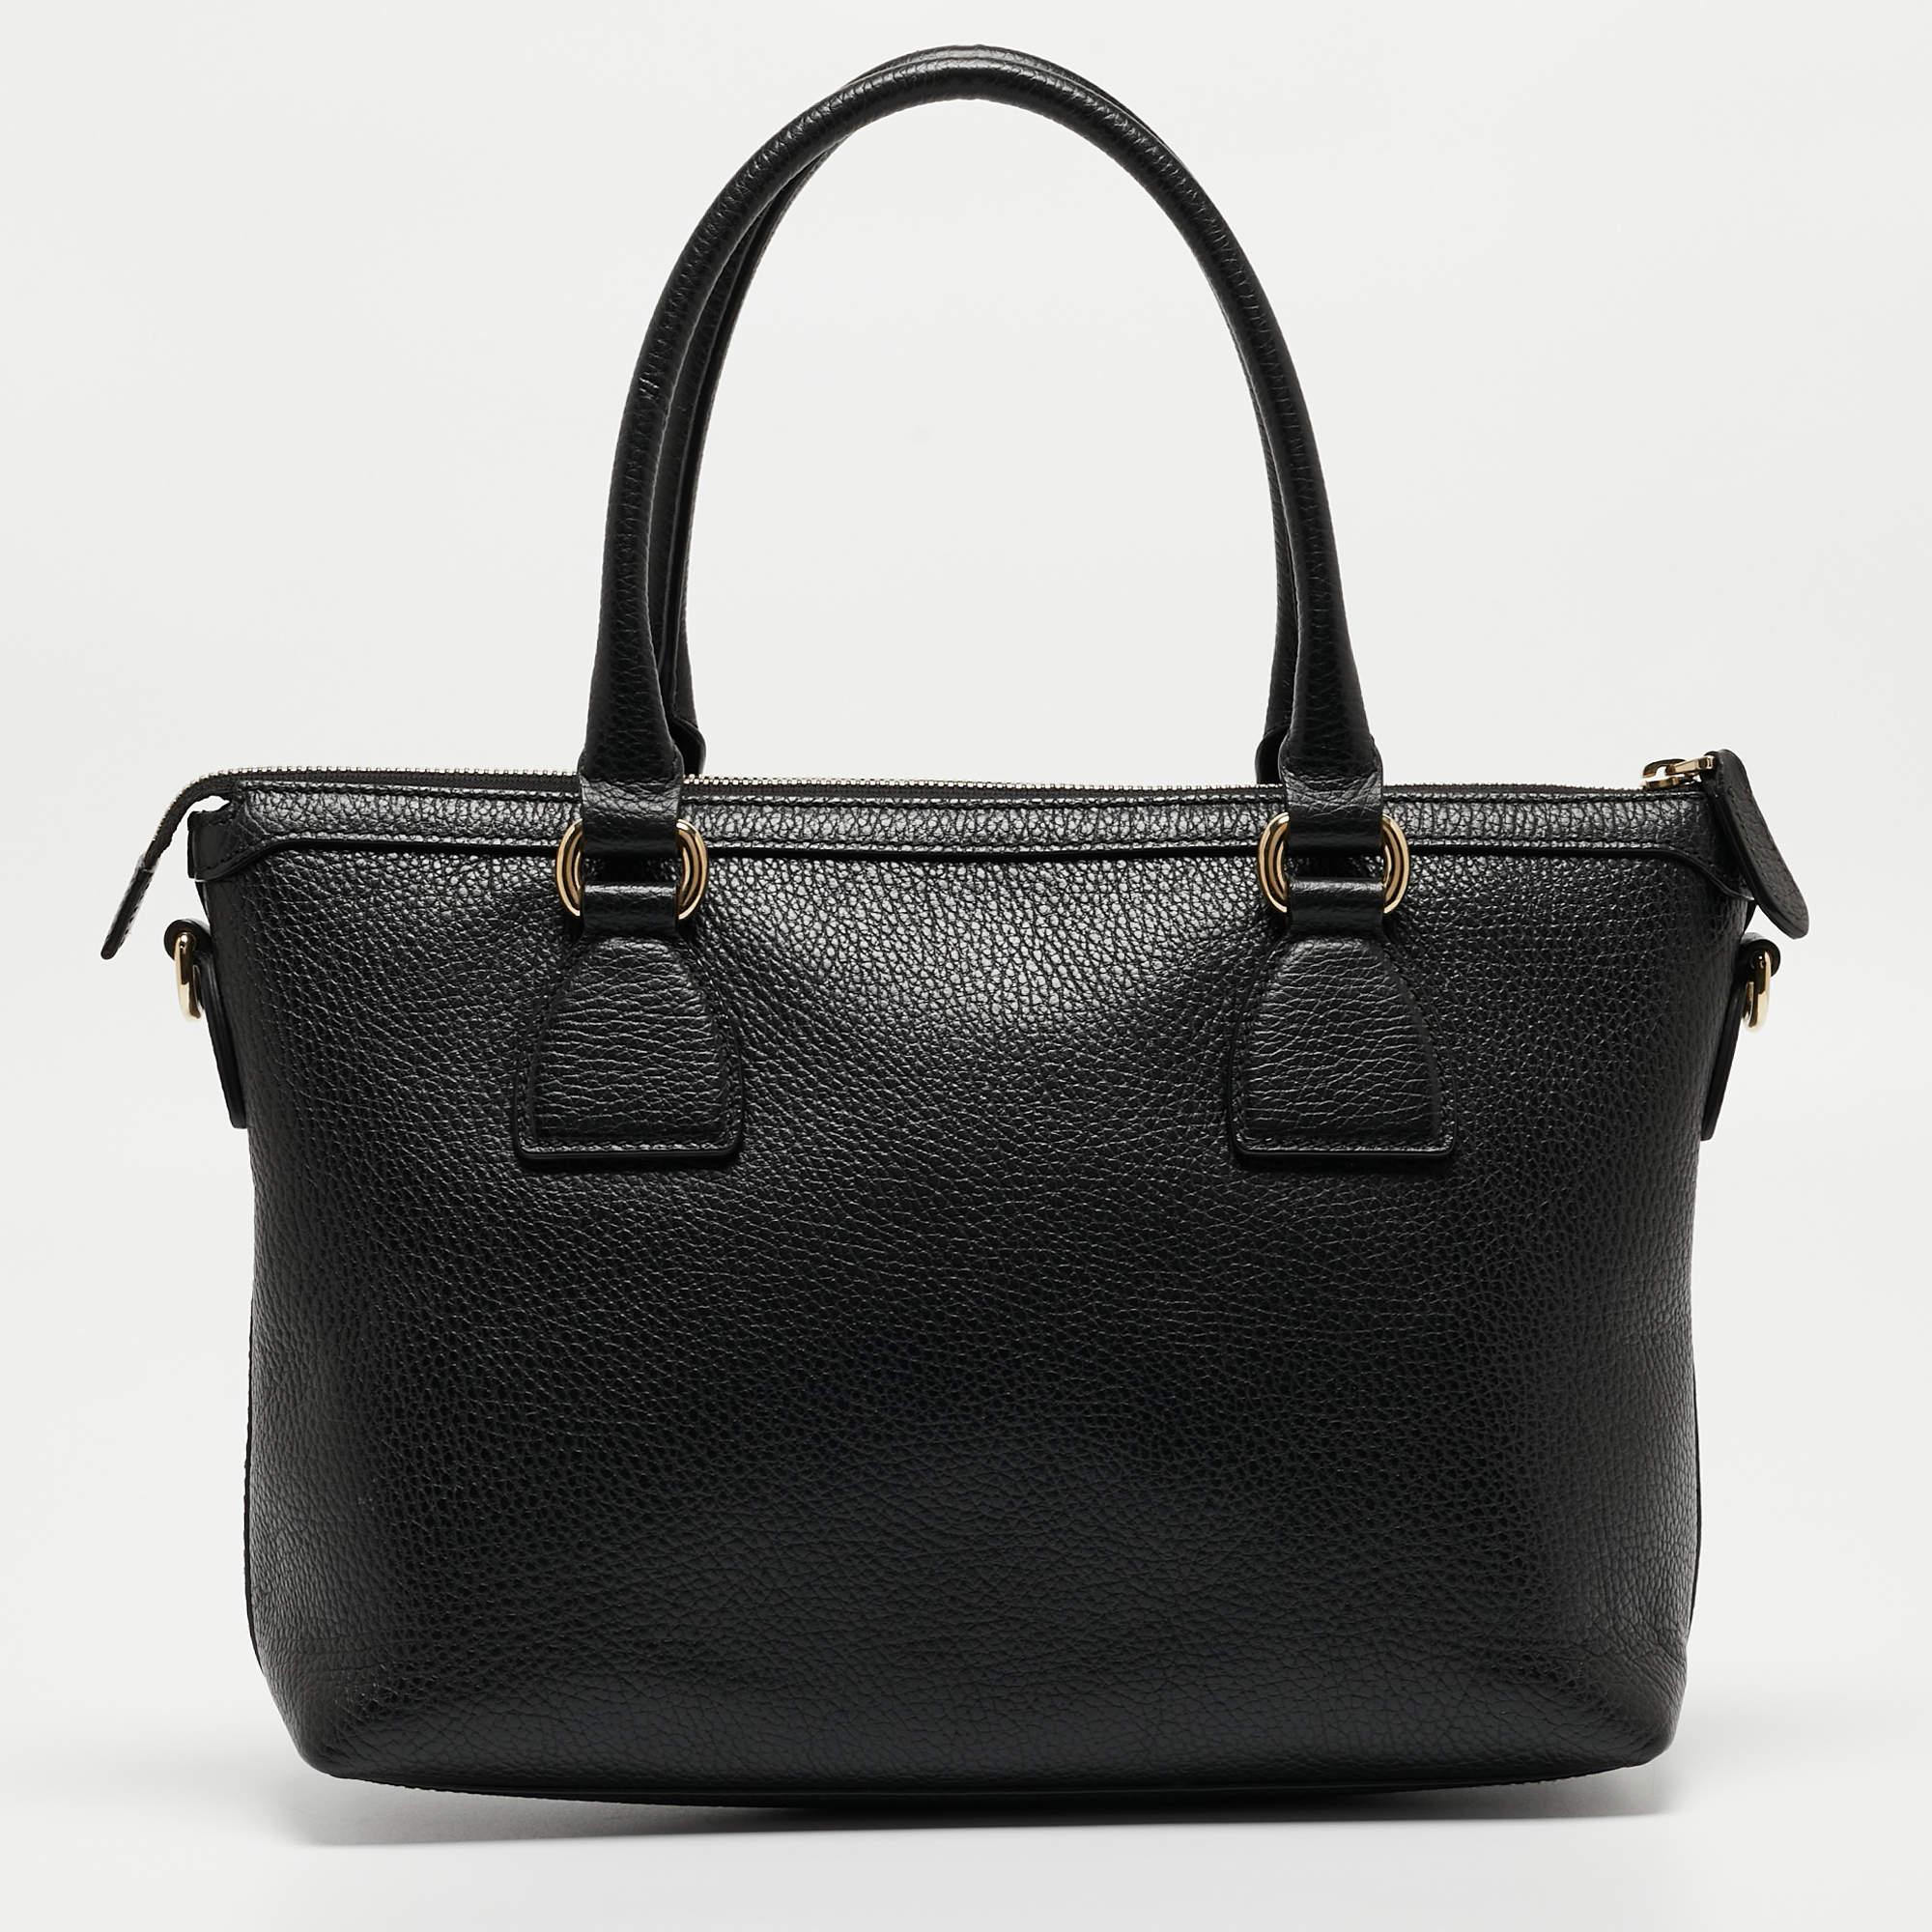 Thoughtful details, high quality, and everyday convenience mark this designer tote for women by Gucci. The bag is sewn with skill to deliver a refined look and an impeccable finish.

Includes: Original Dustbag, Info Booklet, Detachable Strap